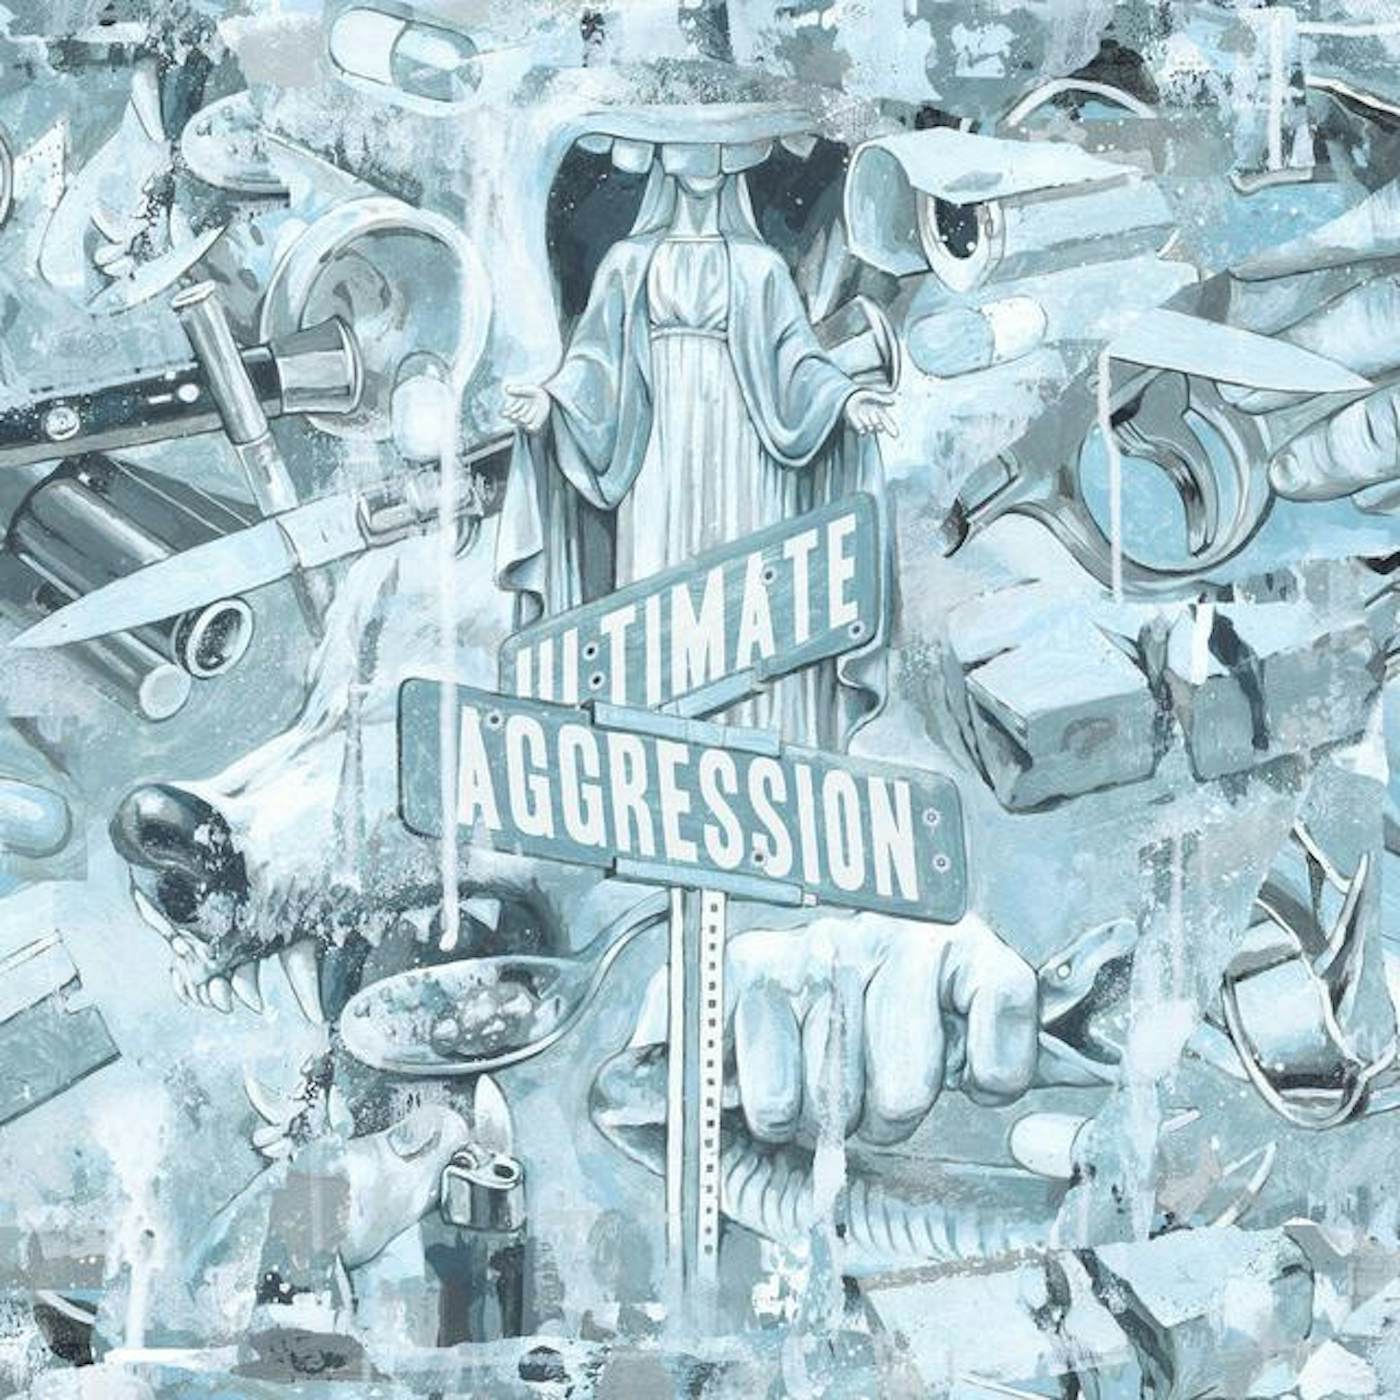 Year of the Knife Ultimate Aggression Vinyl Record